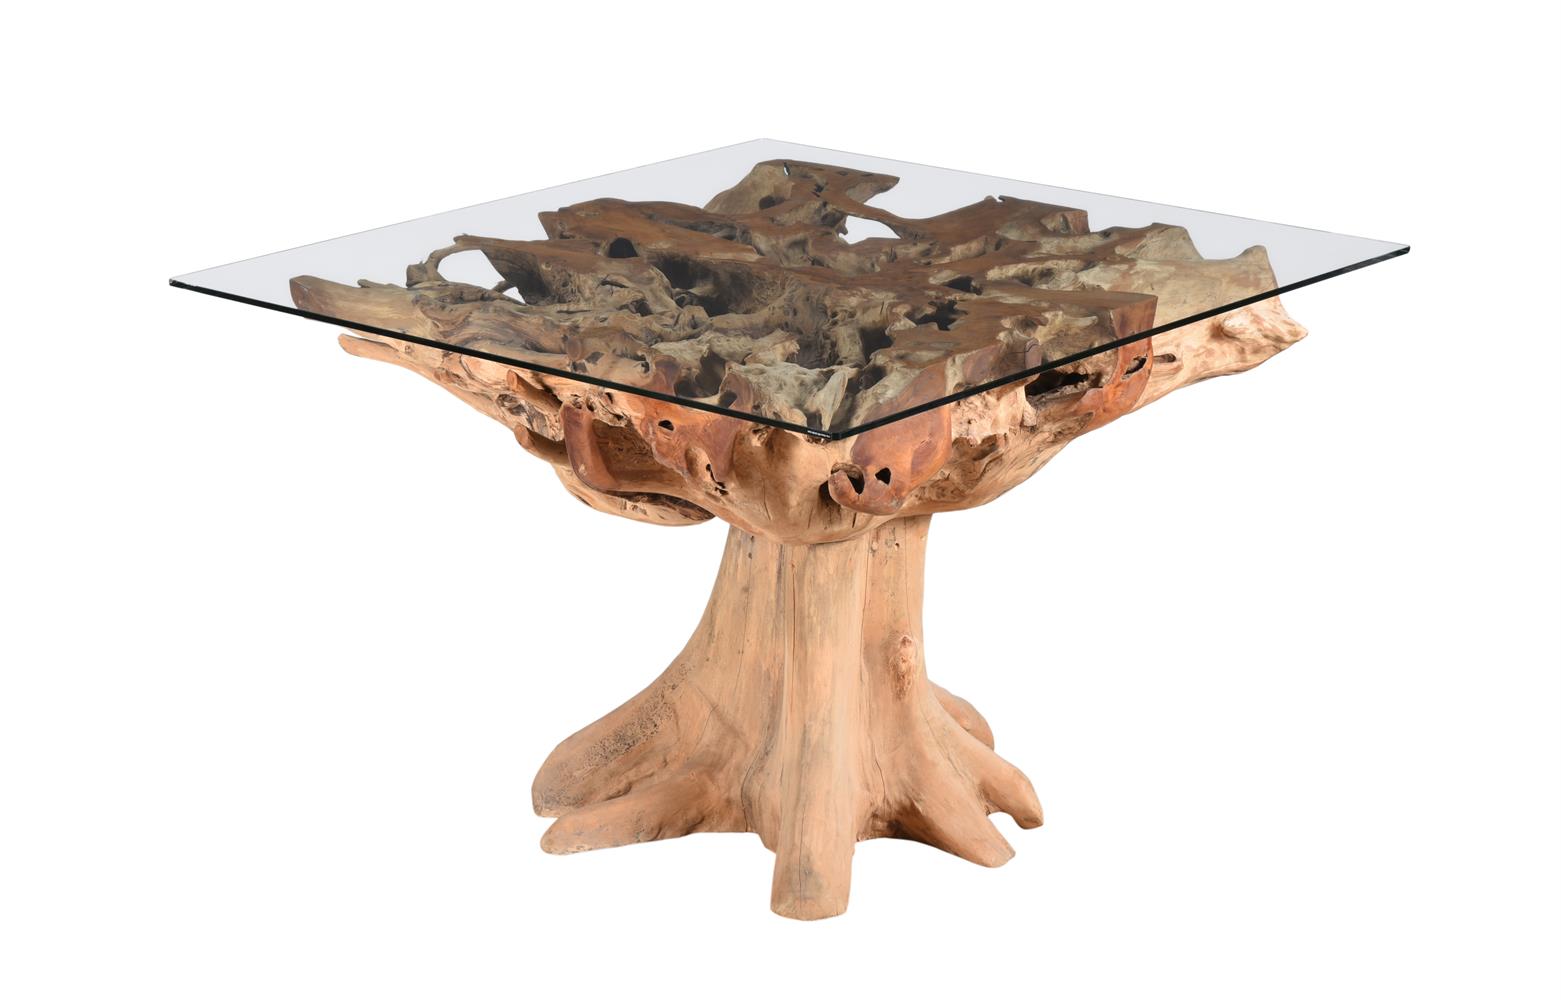 A DRIFTWOOD EFFECT AND GLASS TOPPED PEDESTAL TABLE AND FOUR RUSTIC CHAIRS EN-SUITE - Image 7 of 9